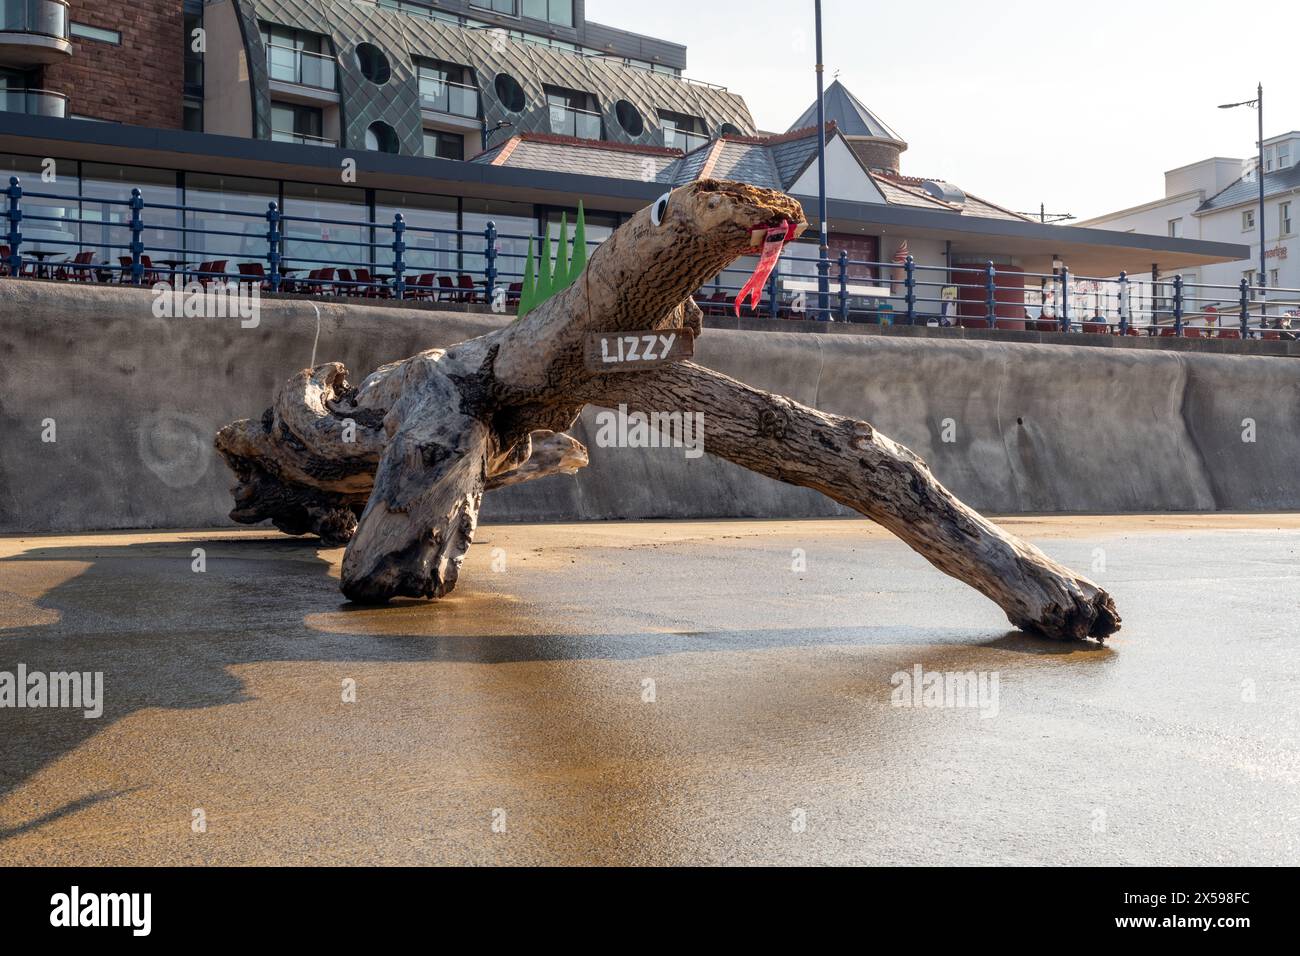 A Tree stump washed on the Porthcawl's seafront has been decorated as a lizard. Stock Photo